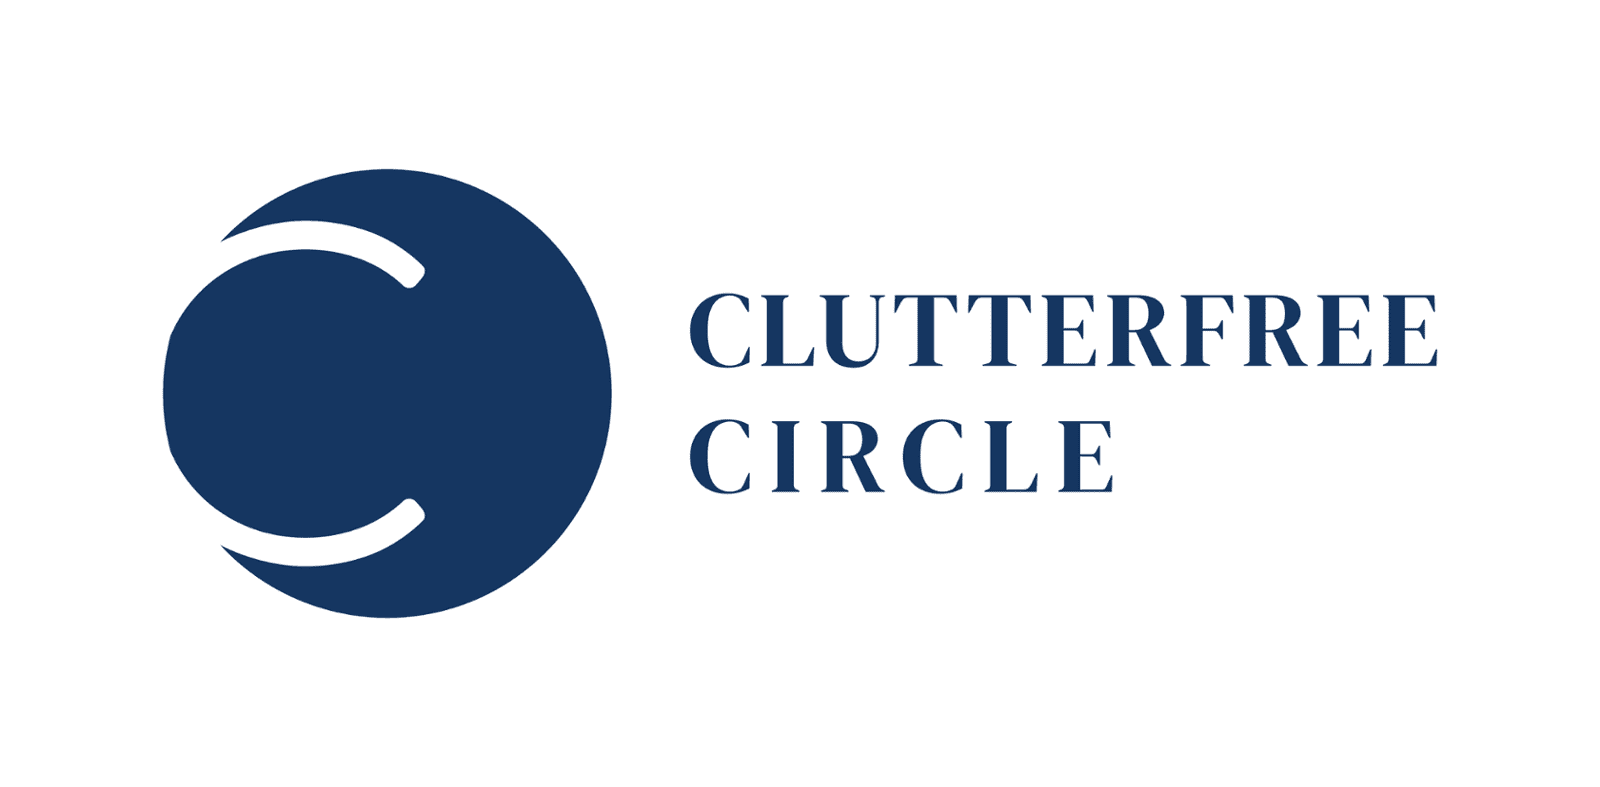 Clutterfree Circle